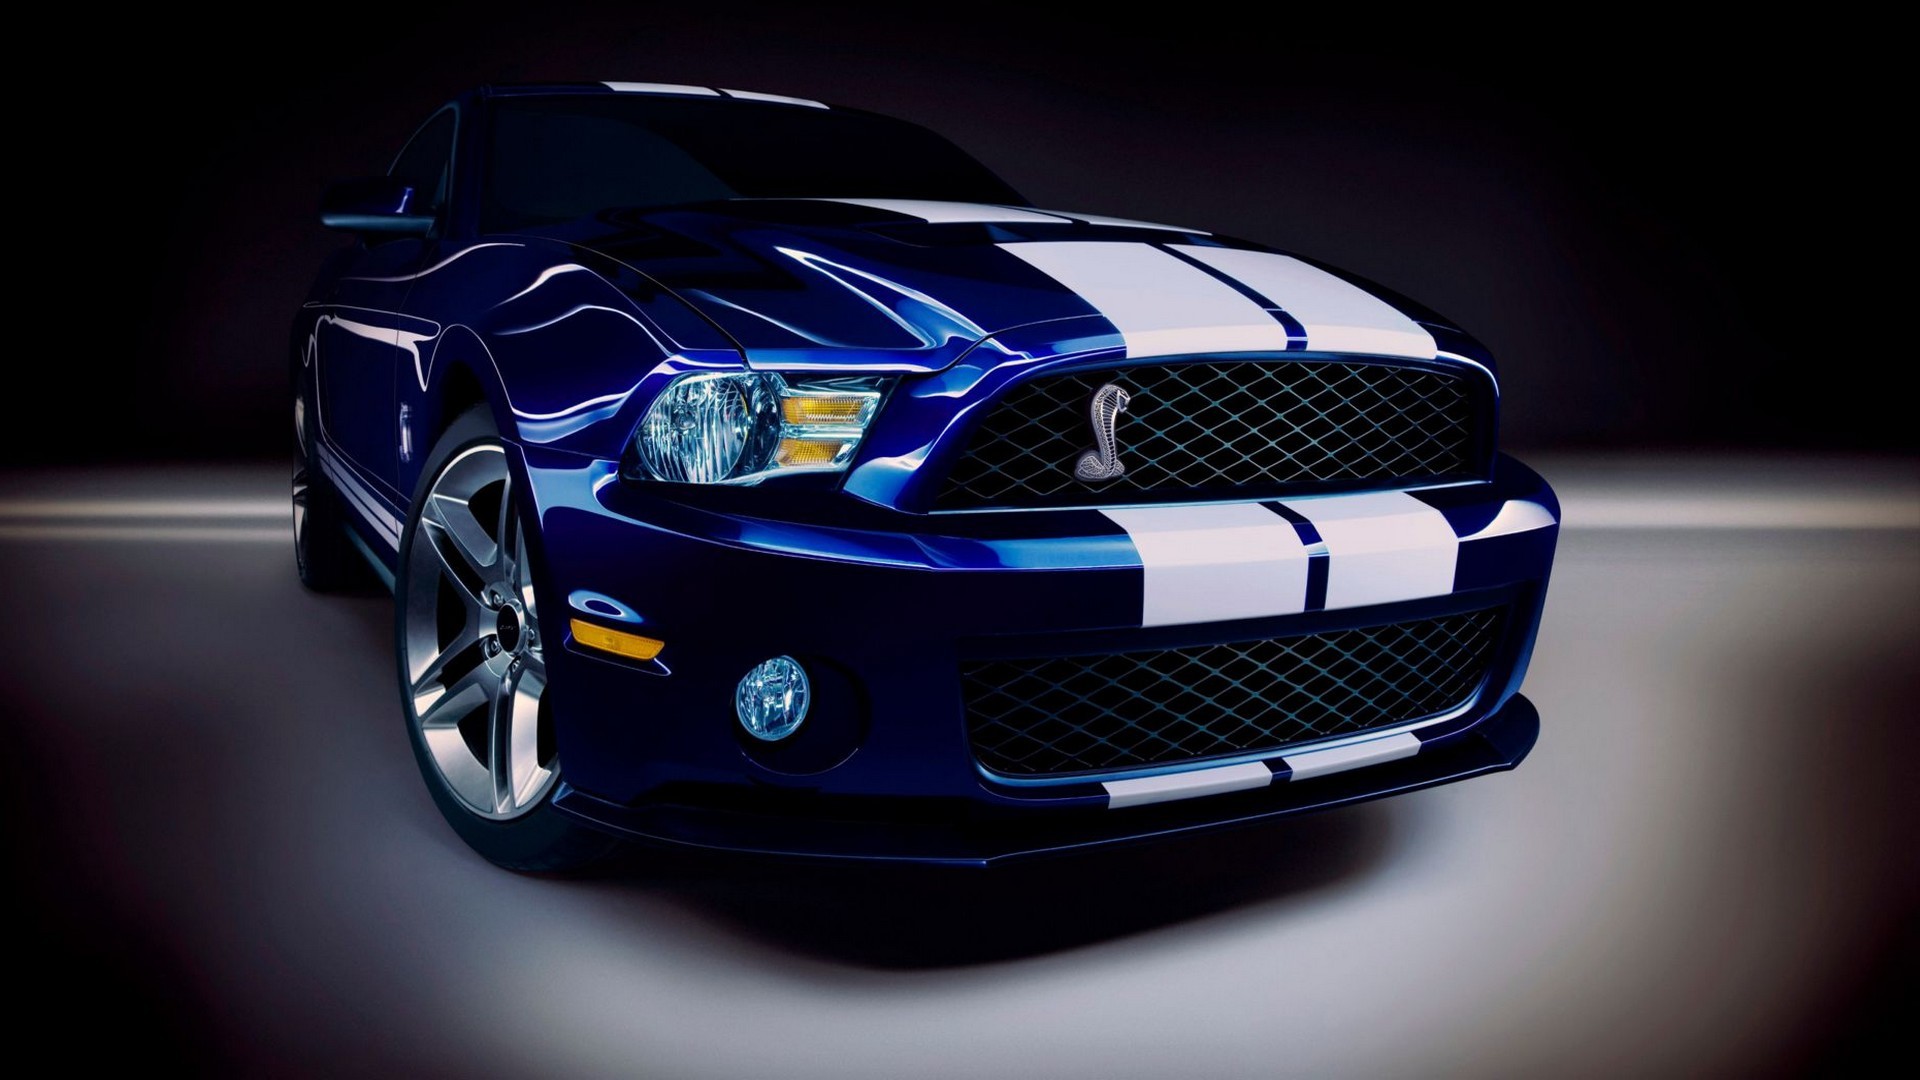 Ford Mustang Shelby Gt350 Wallpaper Ibackgroundwallpaper